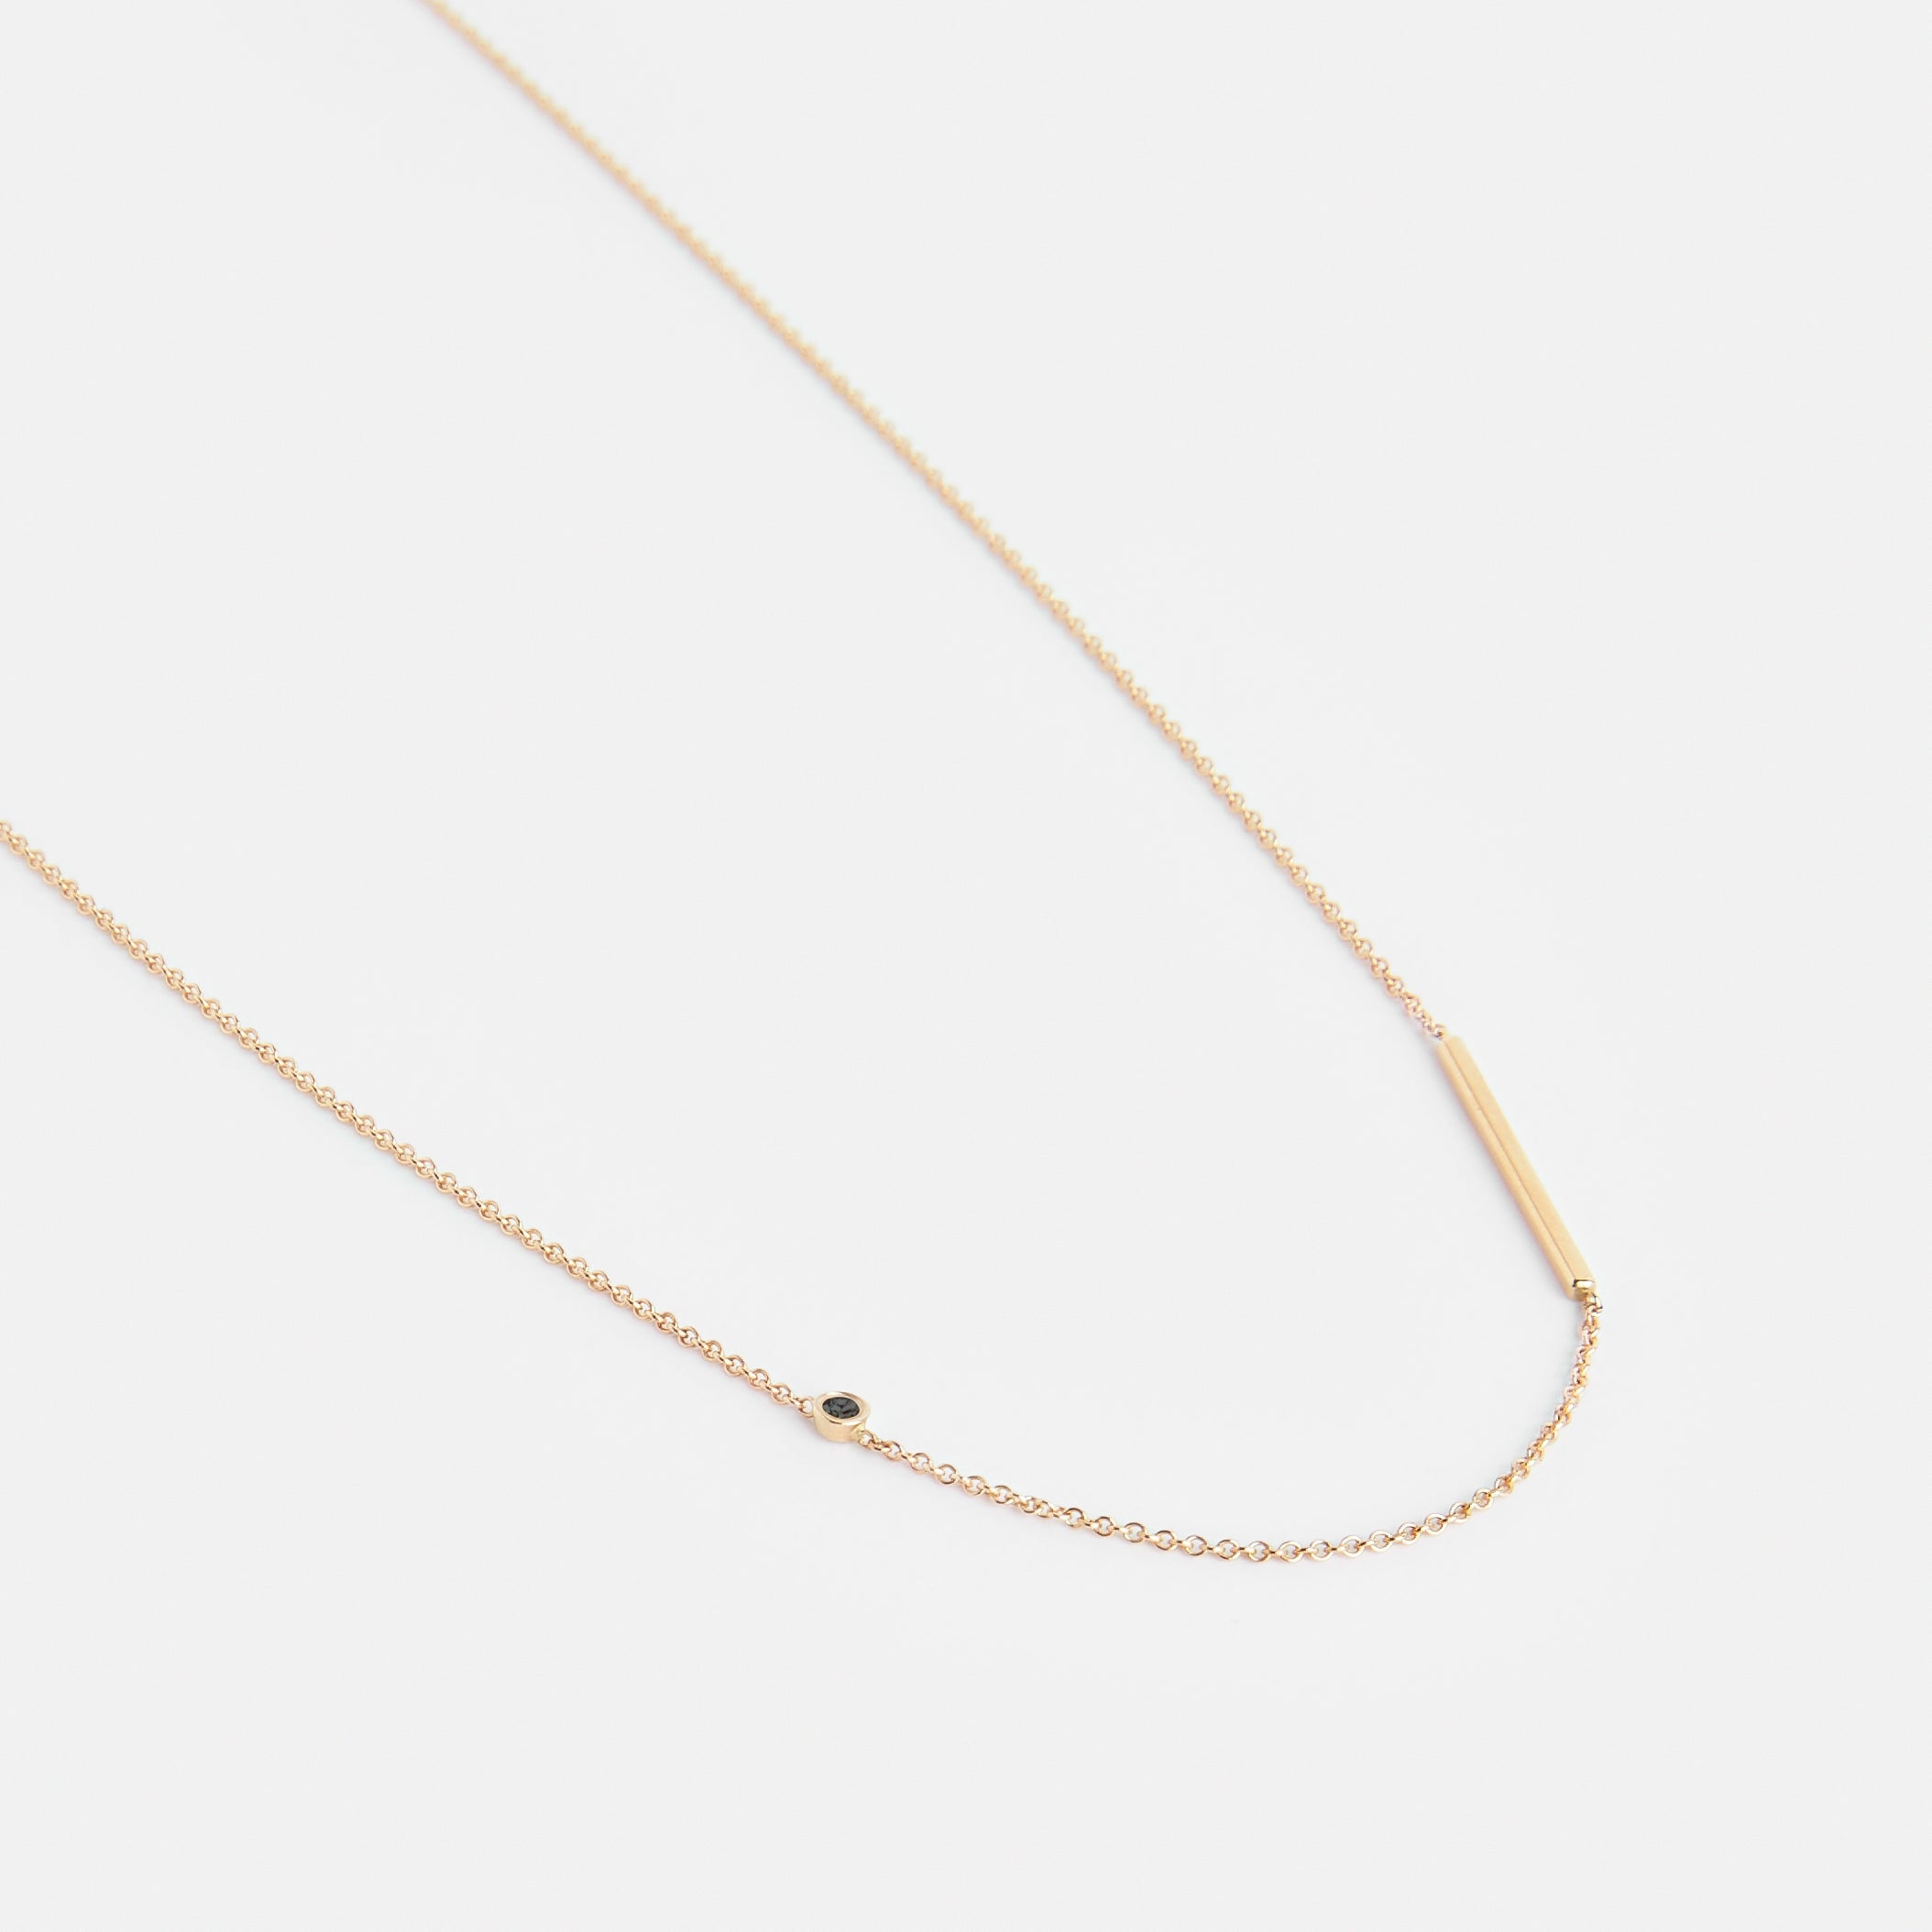 Iki Unconventional Necklace in 14k Gold set with Black Diamond By SHW Fine Jewelry NYC